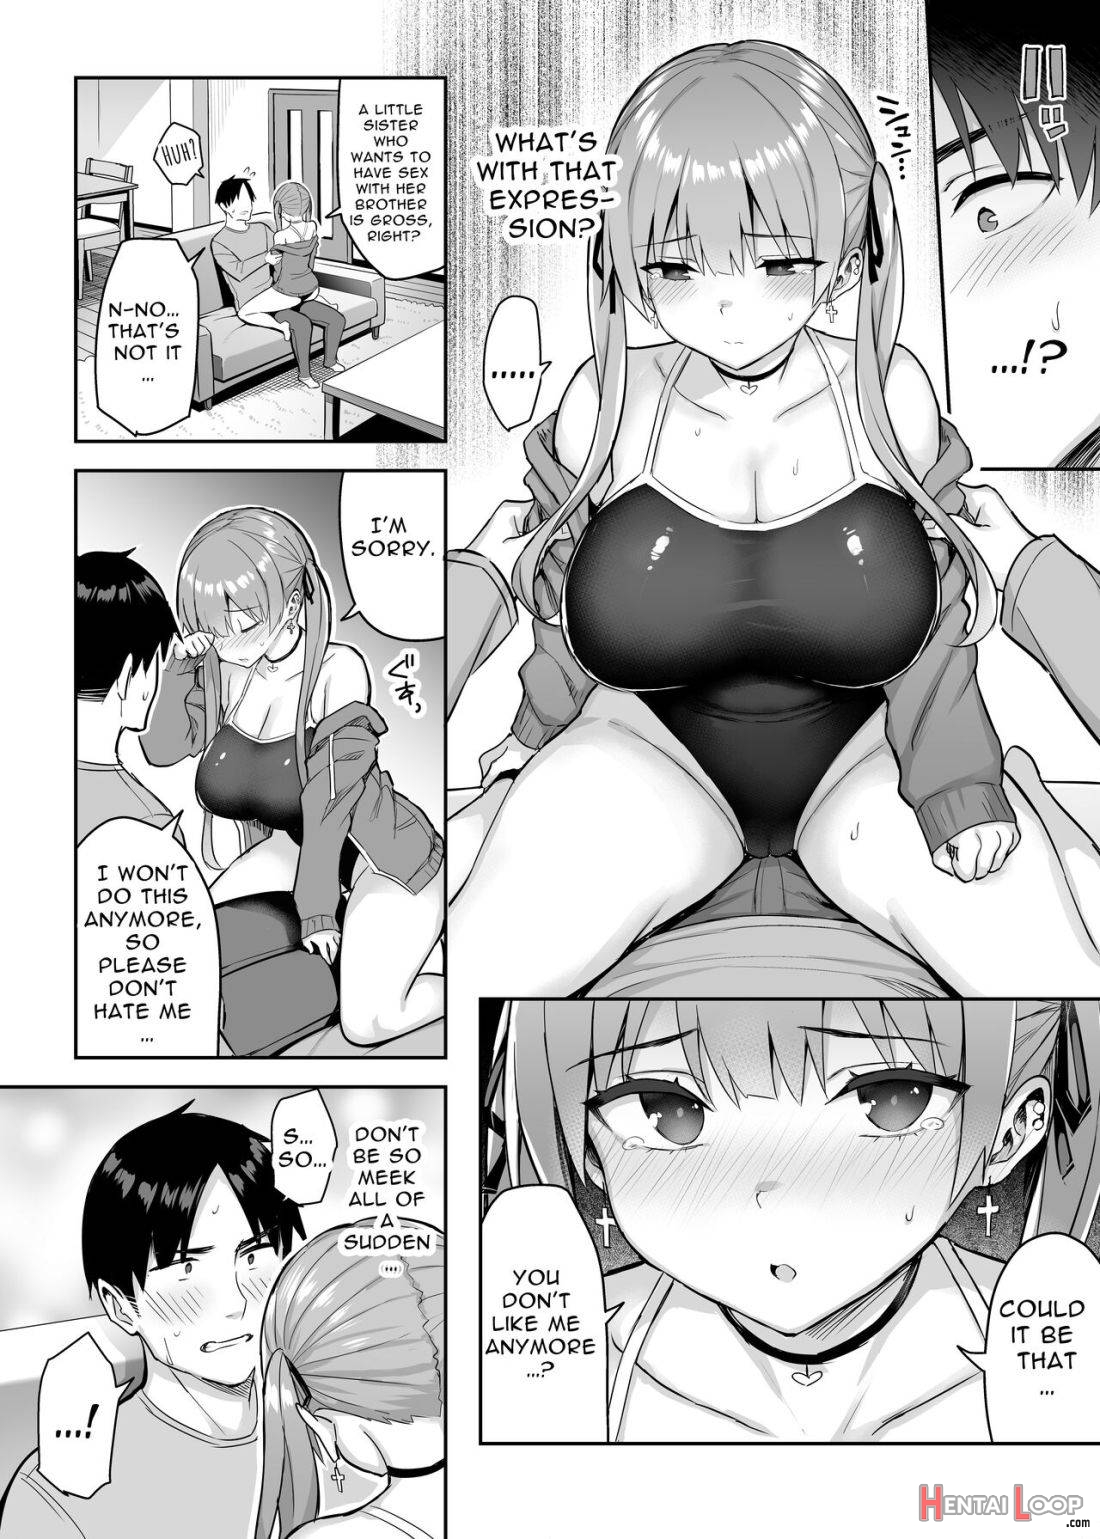 I Can’t Handle My Former Bookworm Little Sister Now That She’s a Slut! 2 page 15